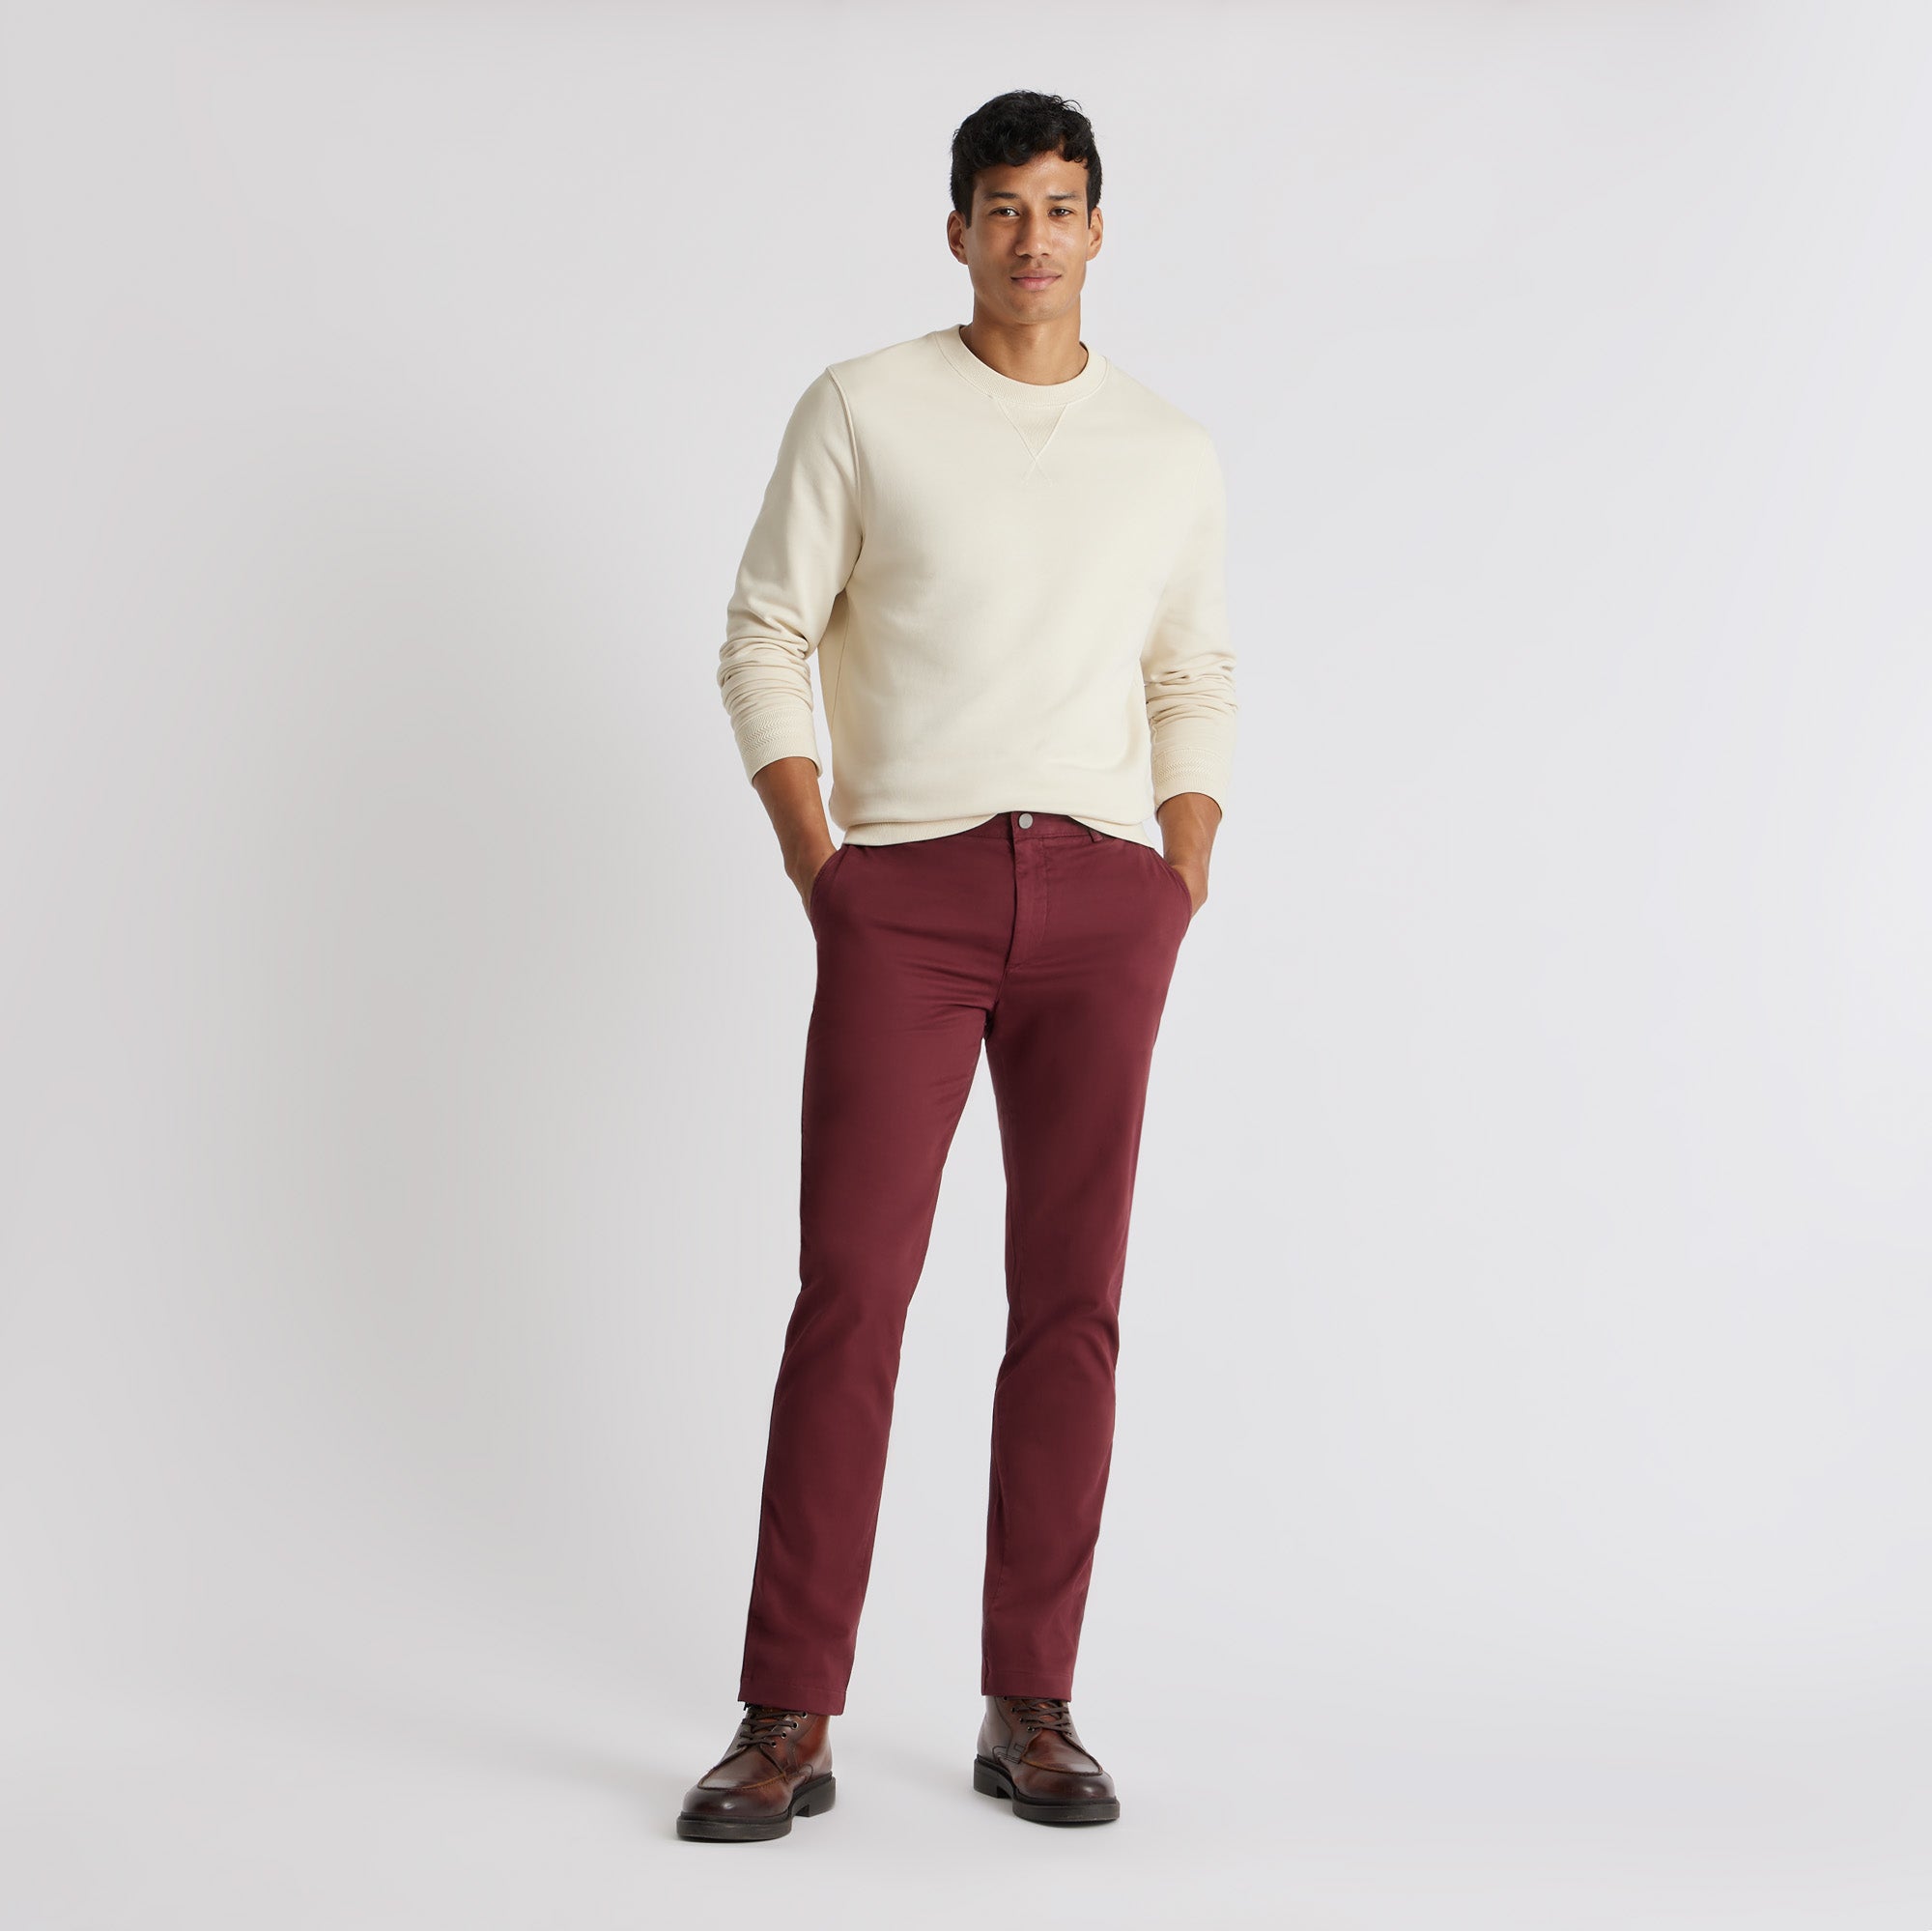 Custom Fit Trousers and Chinos for Men | SPOKE Trousers - SPOKE